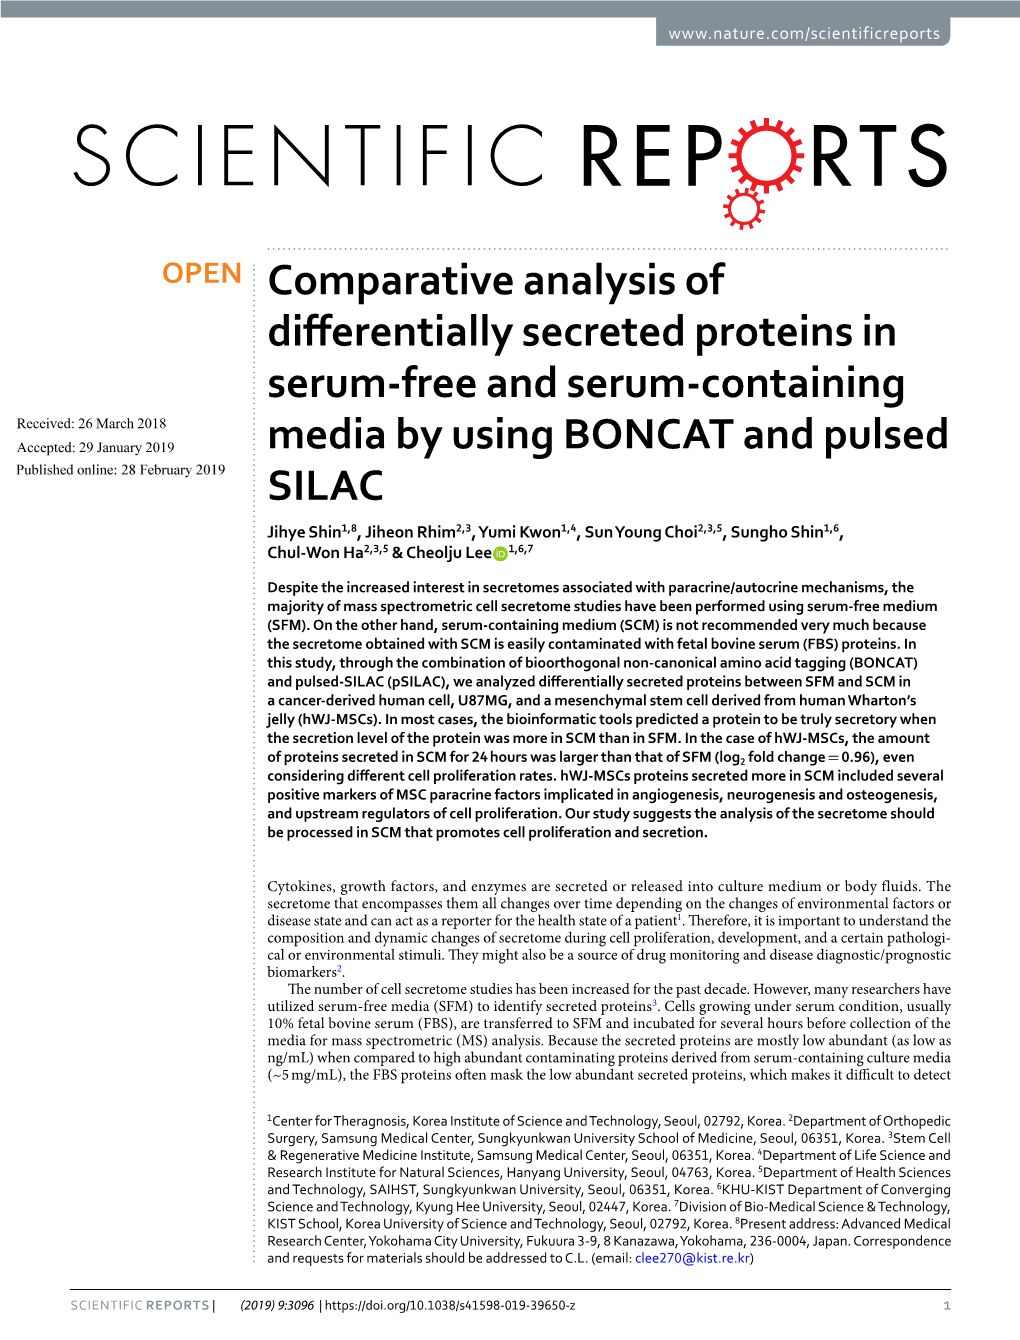 Comparative Analysis of Differentially Secreted Proteins in Serum-Free And